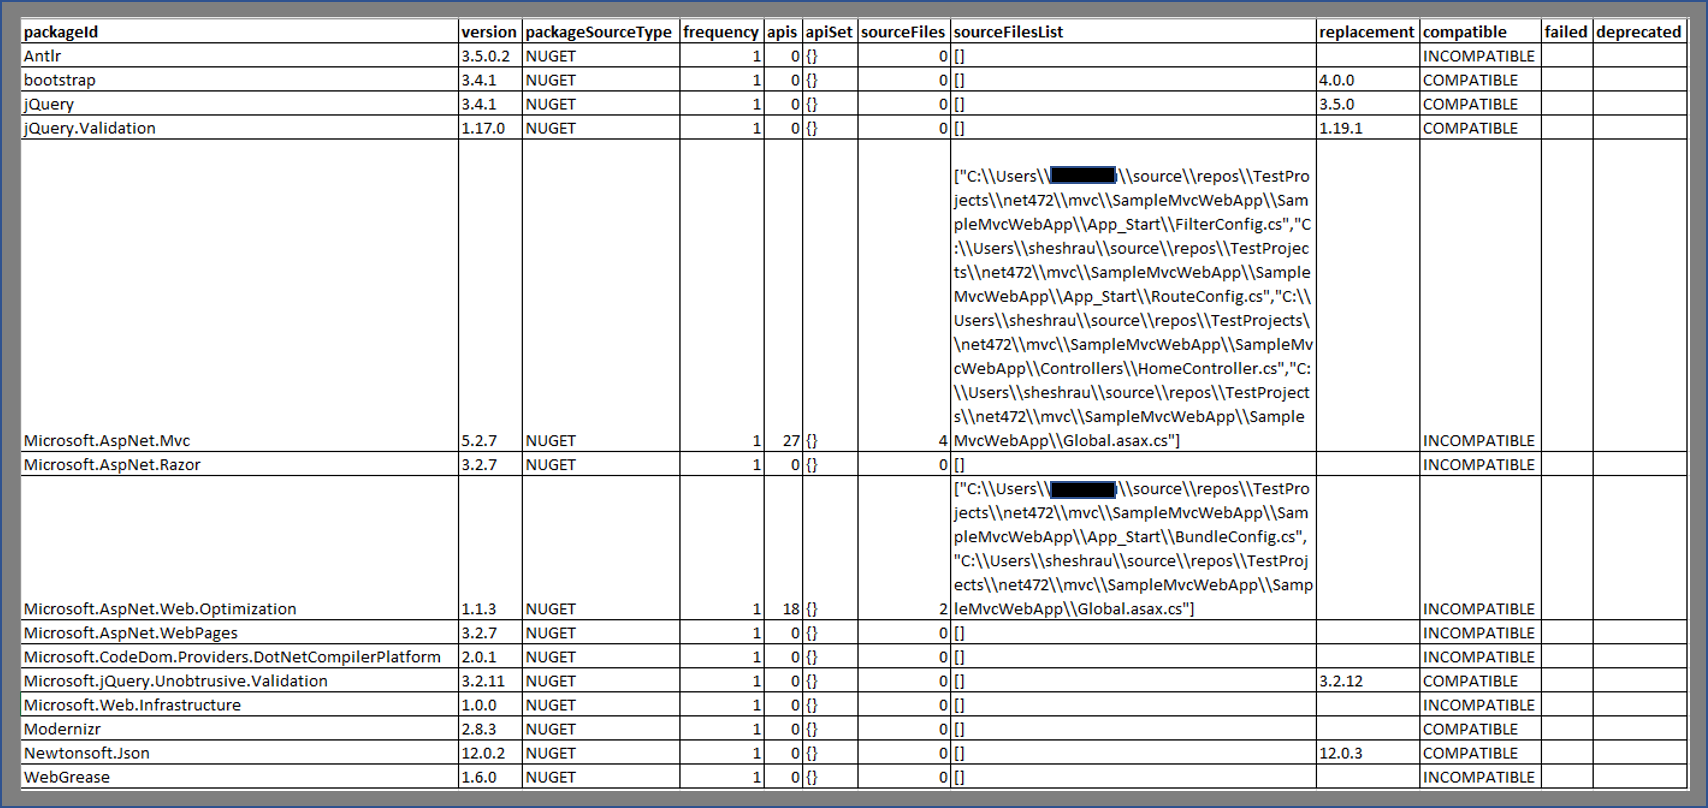 
                    Sample .csv output for a NuGet assessment report, as part of the larger compatibility assessment report.
                